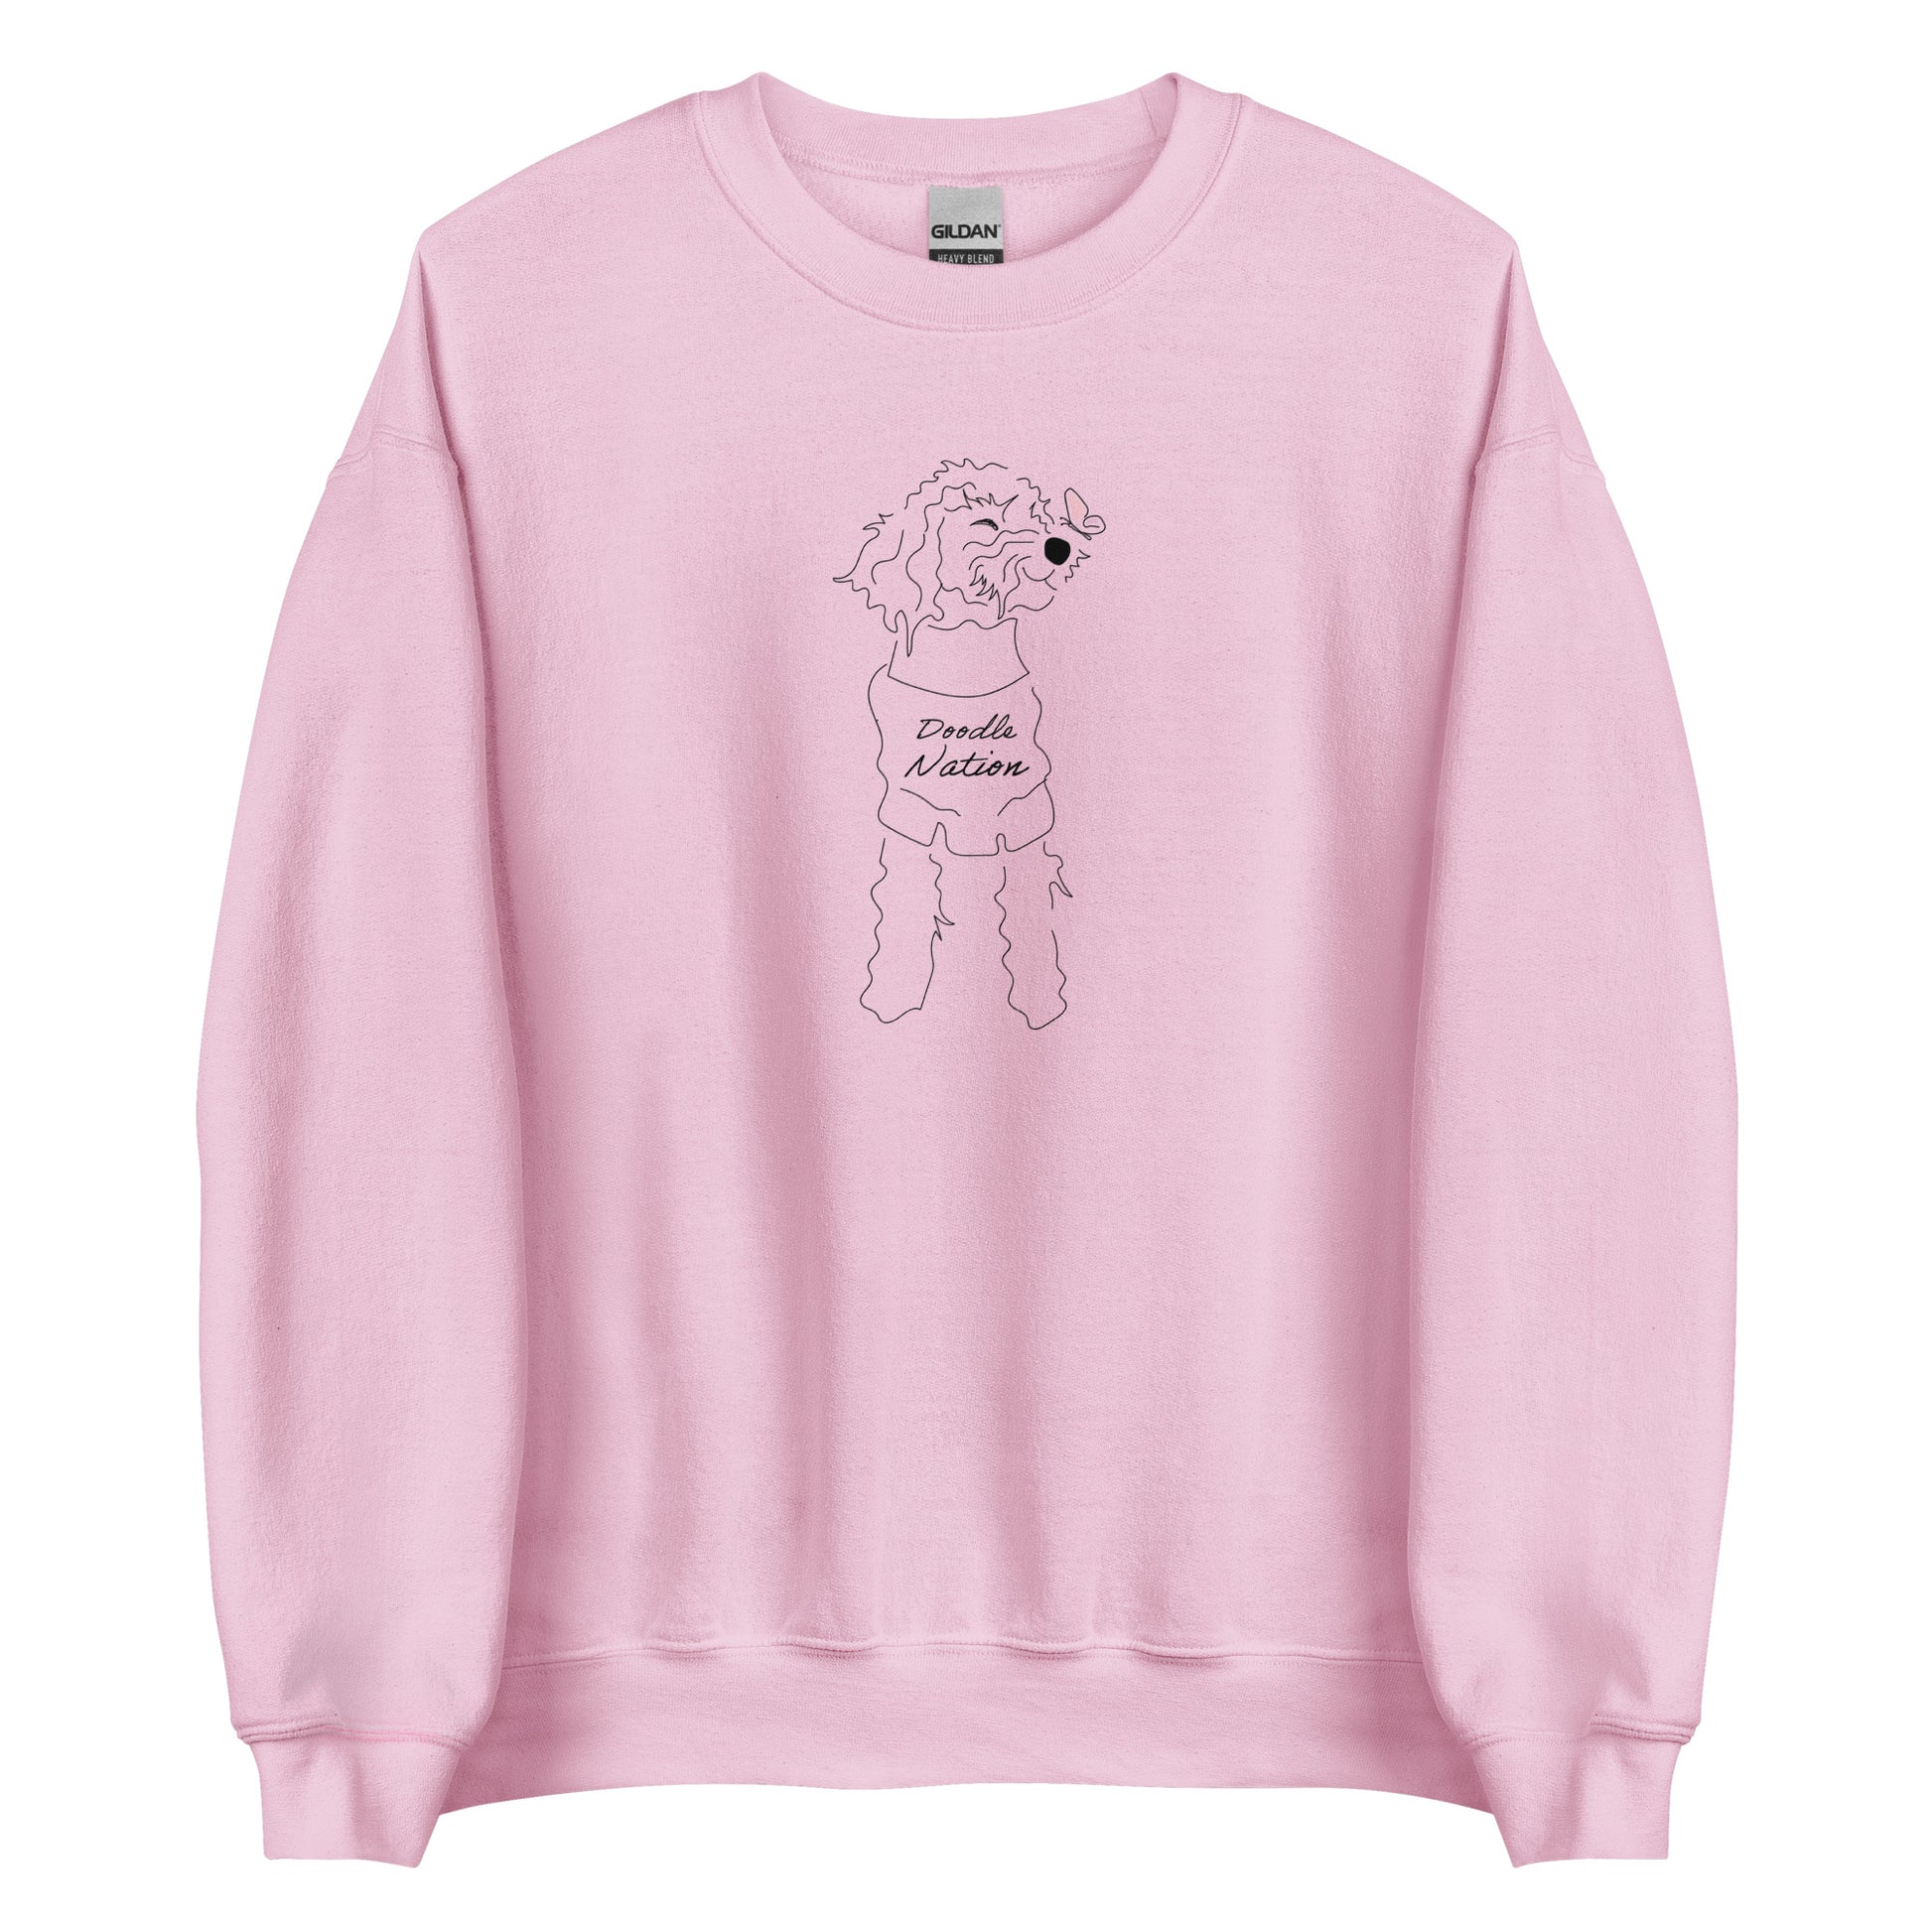 Goldendoodle crew neck sweatshirt with Goldendoodle dog face and words "Doodle Nation" in light pink  color